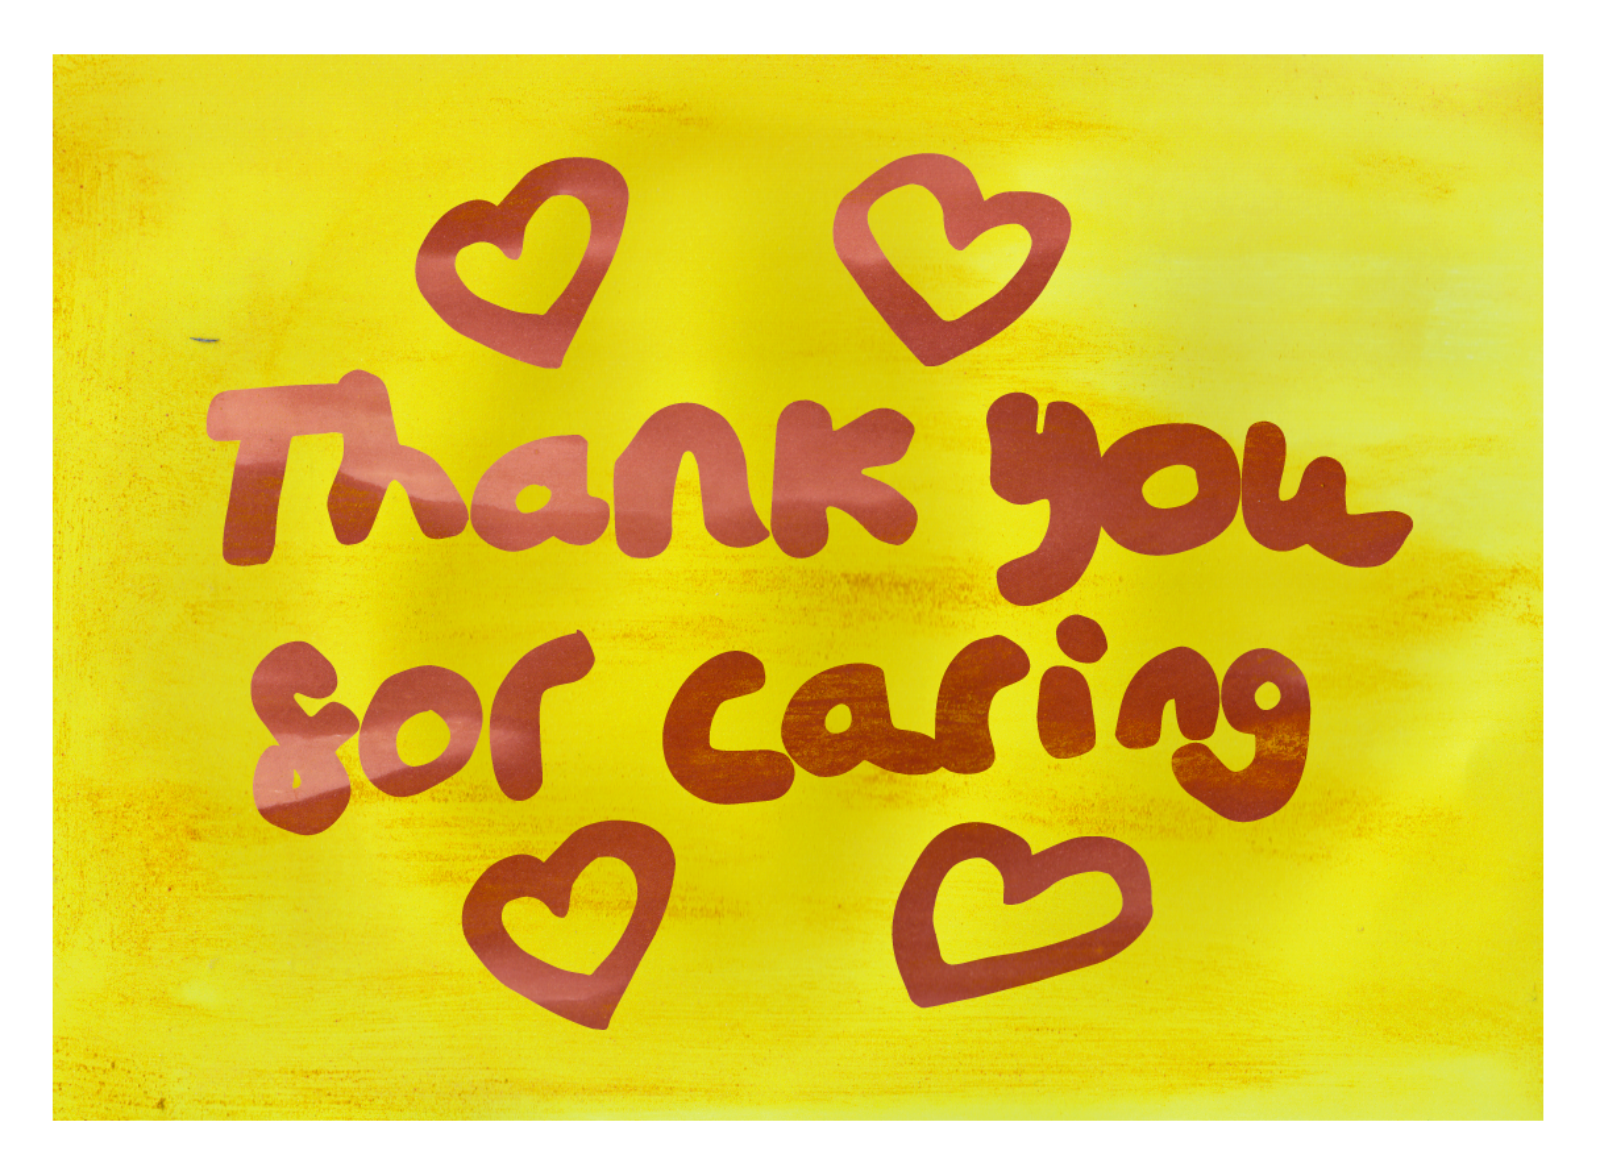 'Thank you for caring' and heart shapes in red writing on a yellow background.